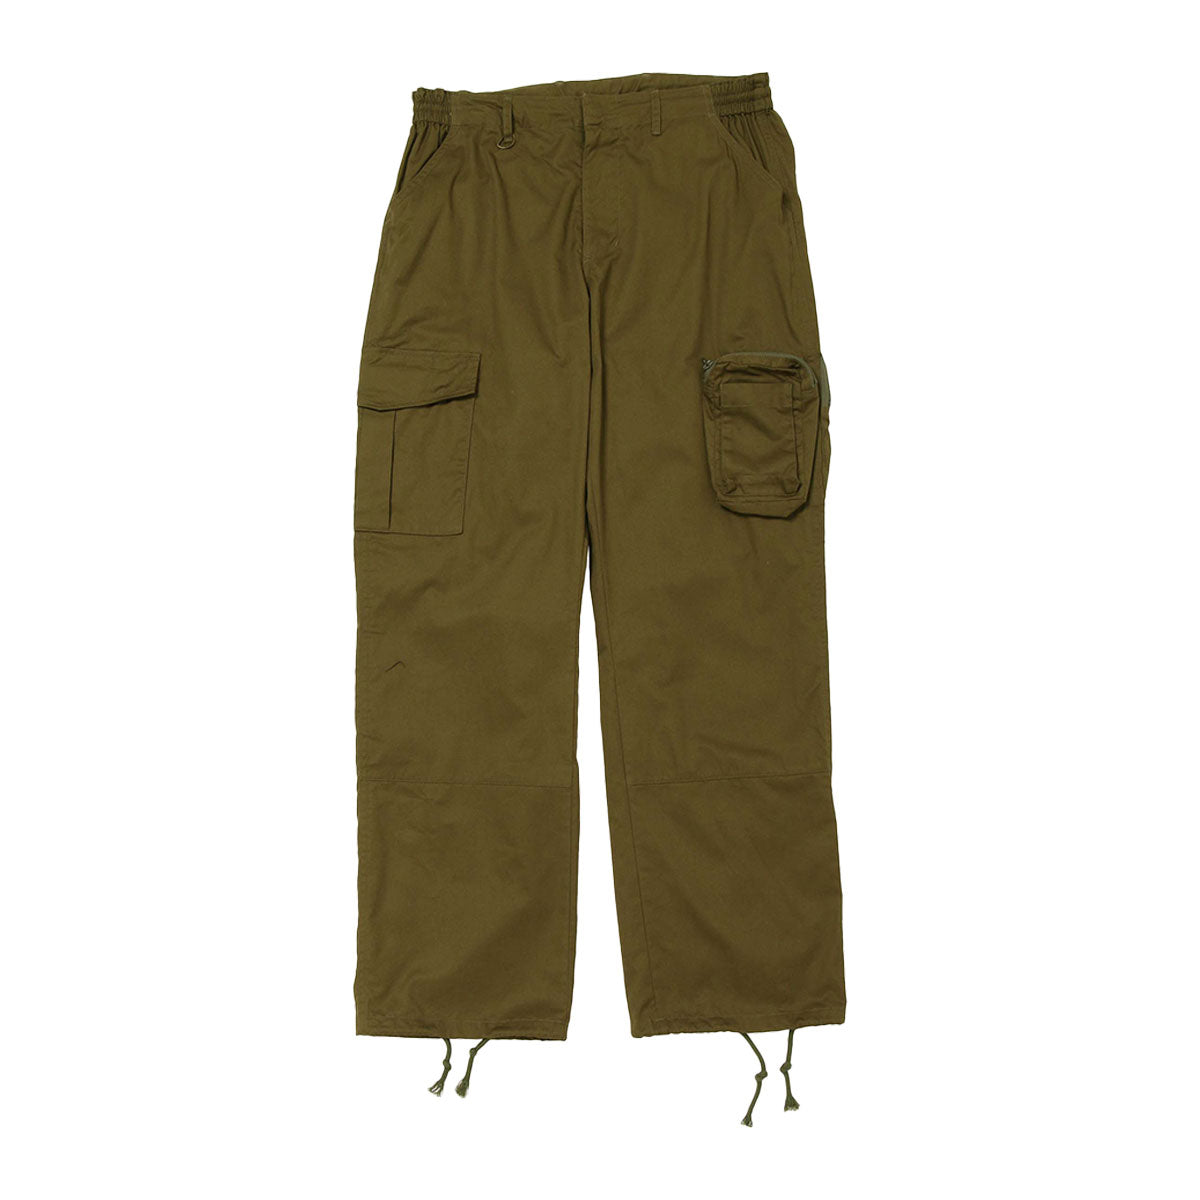 MILITARY PANTS | Why are you here?